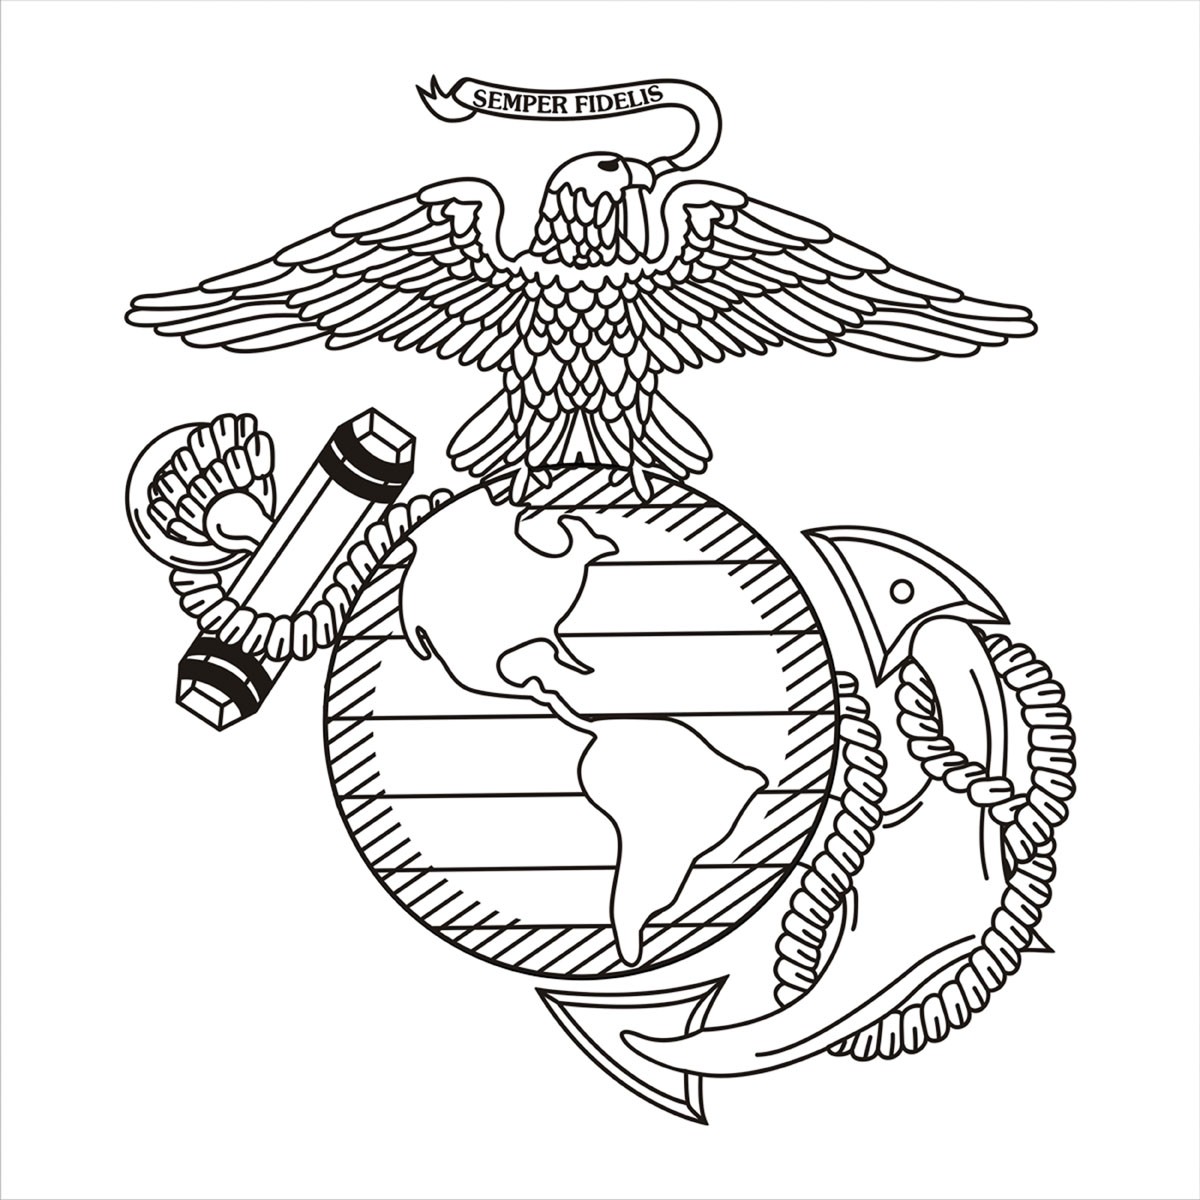 12 Black Right Eagle, Globe, and Anchor Decal | Sgt Grit - Marine 